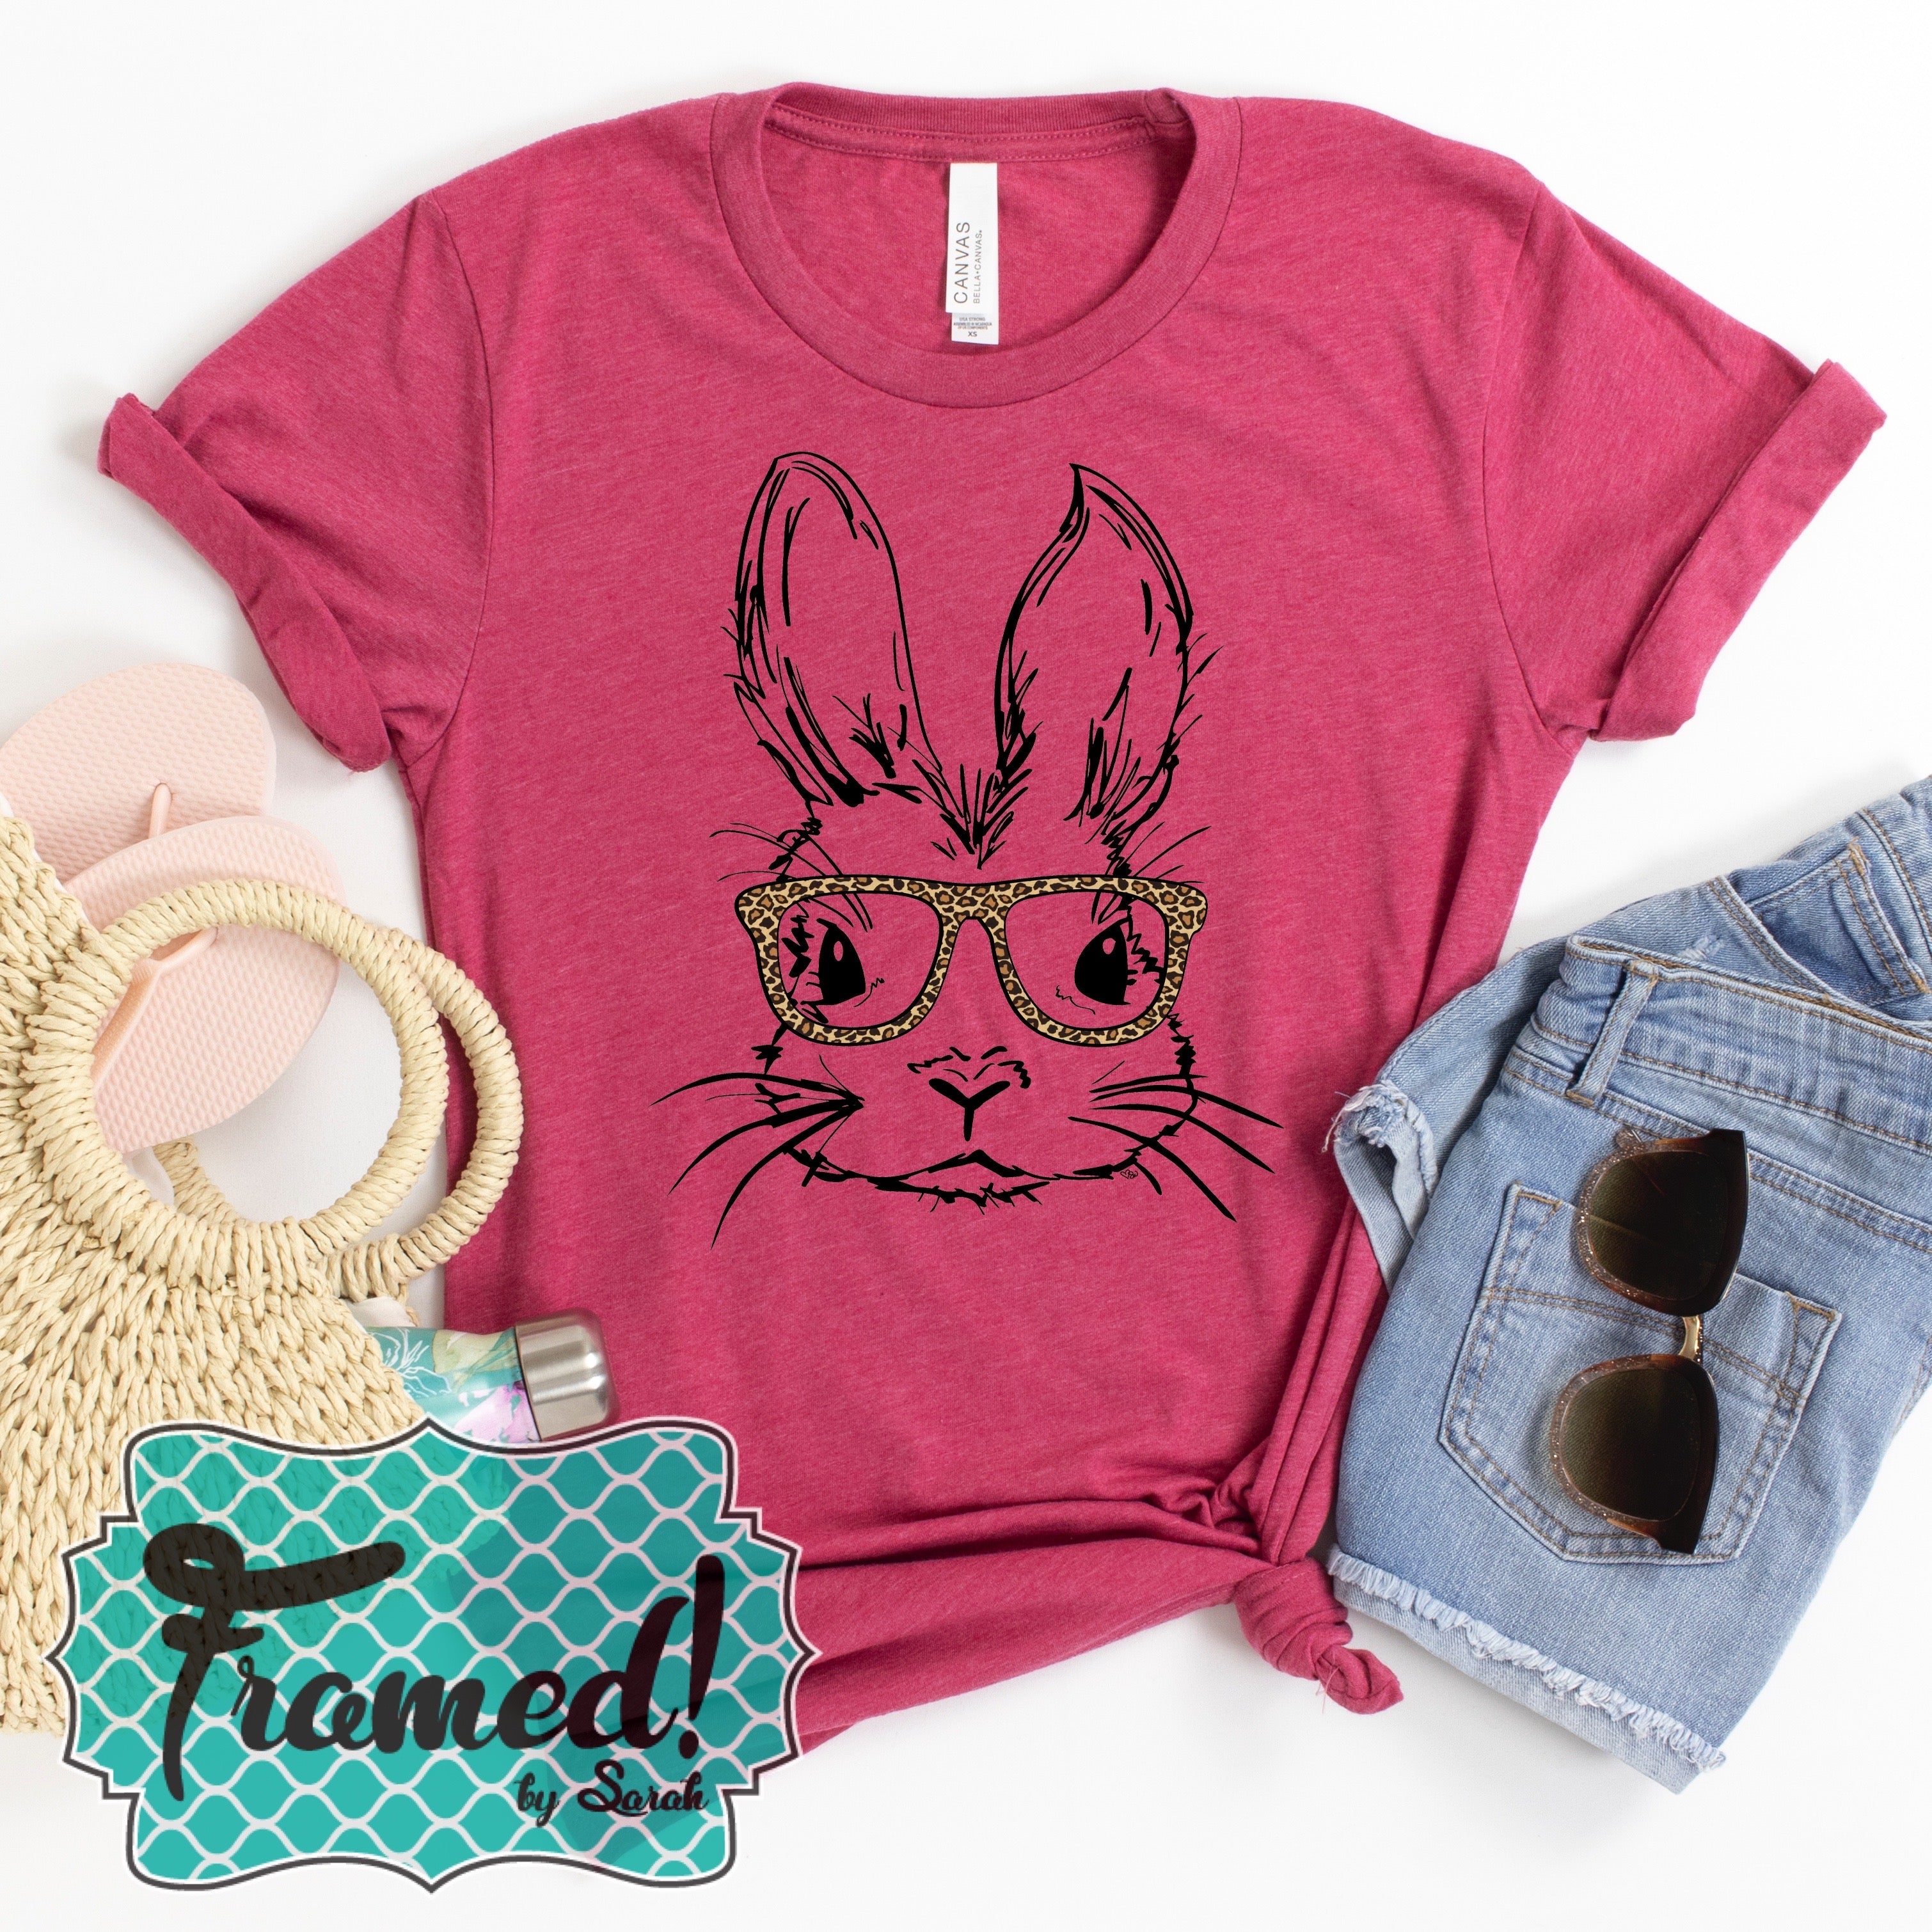 Berry 'Smart Bunny' Tee (Sm, XL & 3X only)